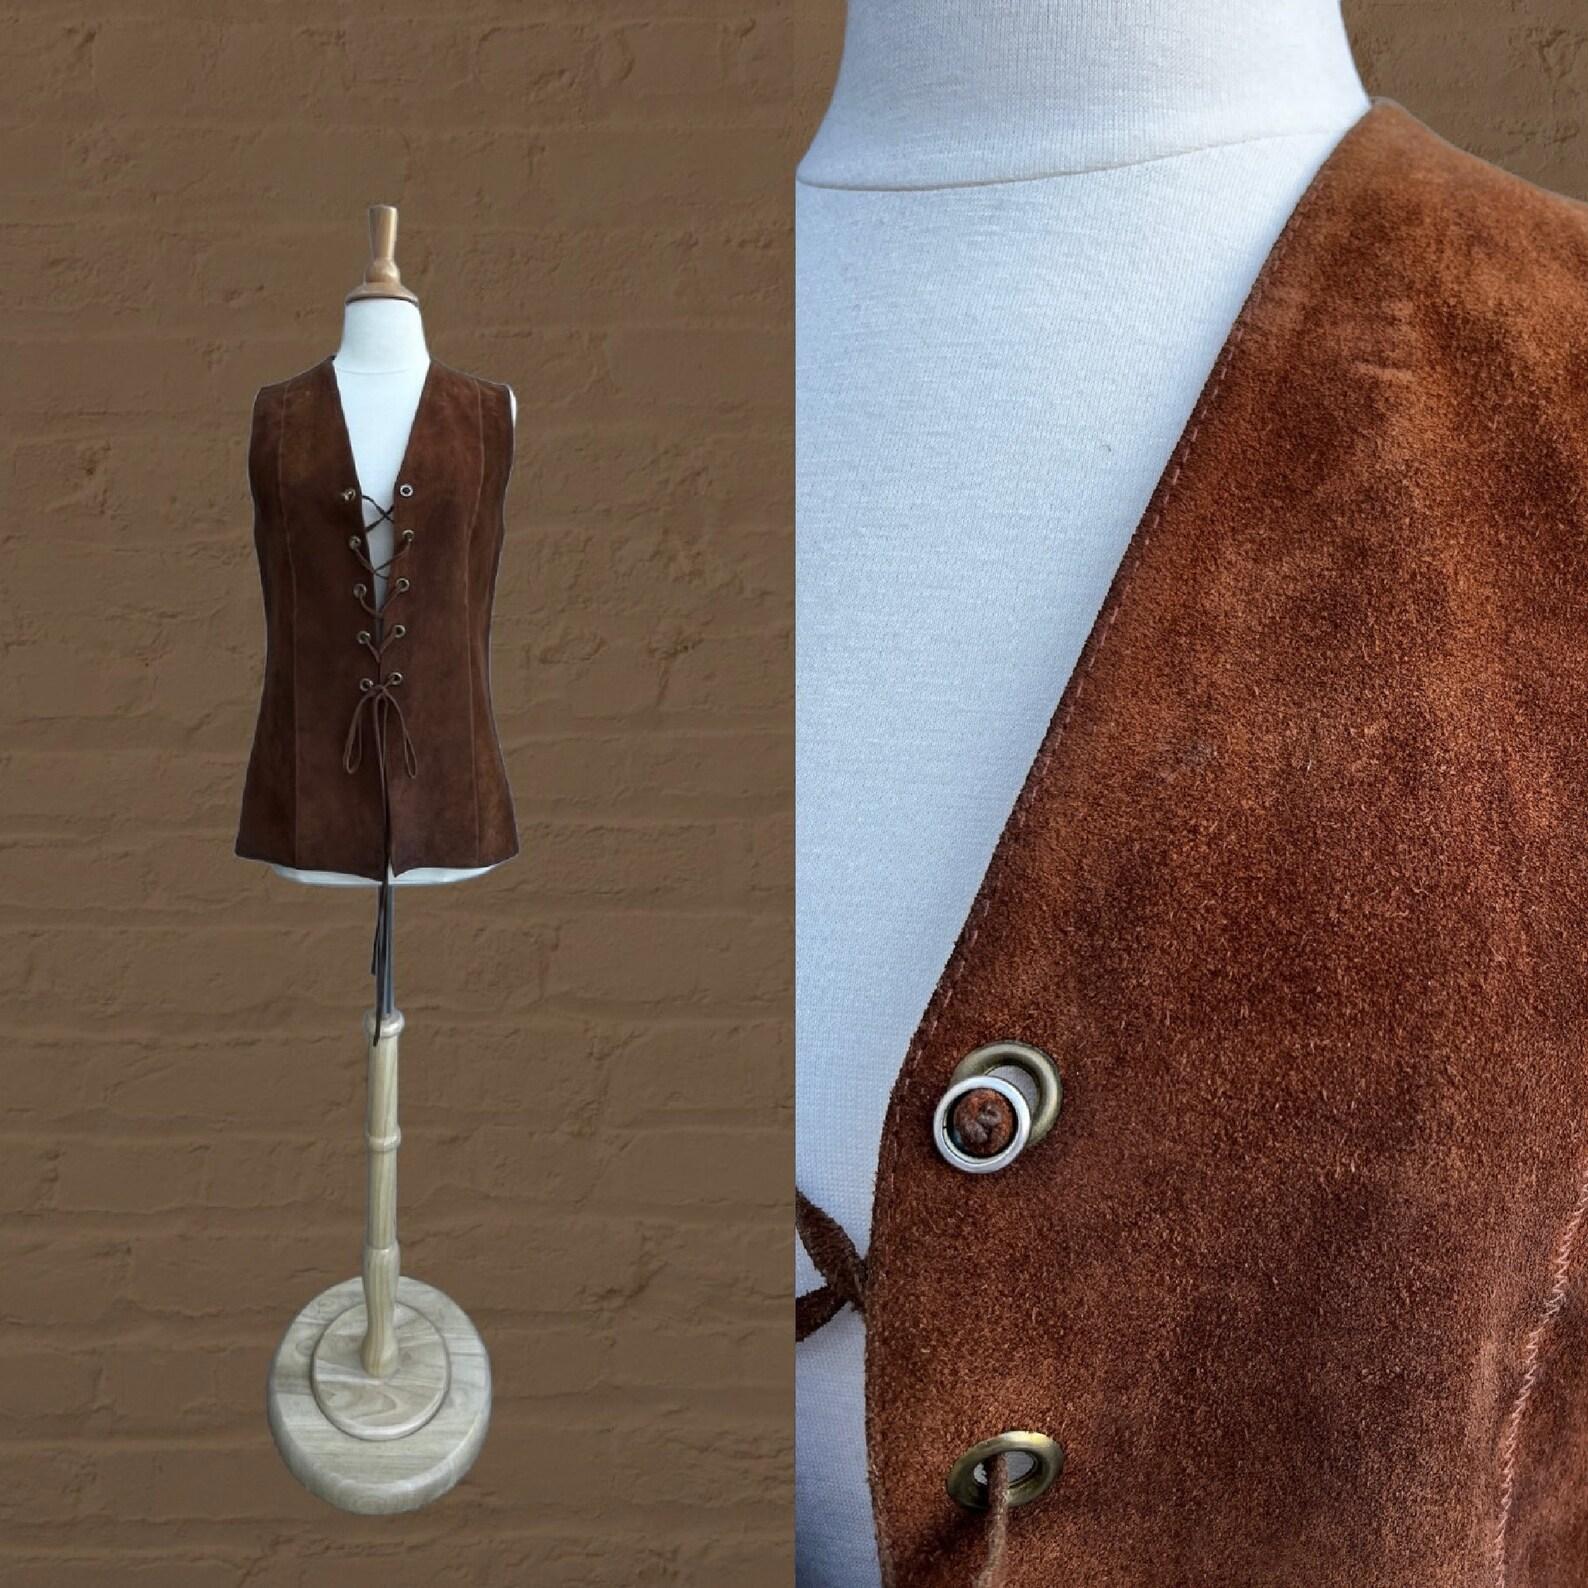 vintage brown suede vest
grommets along center front
lace up closure
top stitching
vest is unlined

Circa 1960s 
Susan Small
Made in England
Brown
100% Suede
Excellent Condition. ✩ Dry Cleaned.

✂----M e a s u r e m e n t s: all in inches.

Bust